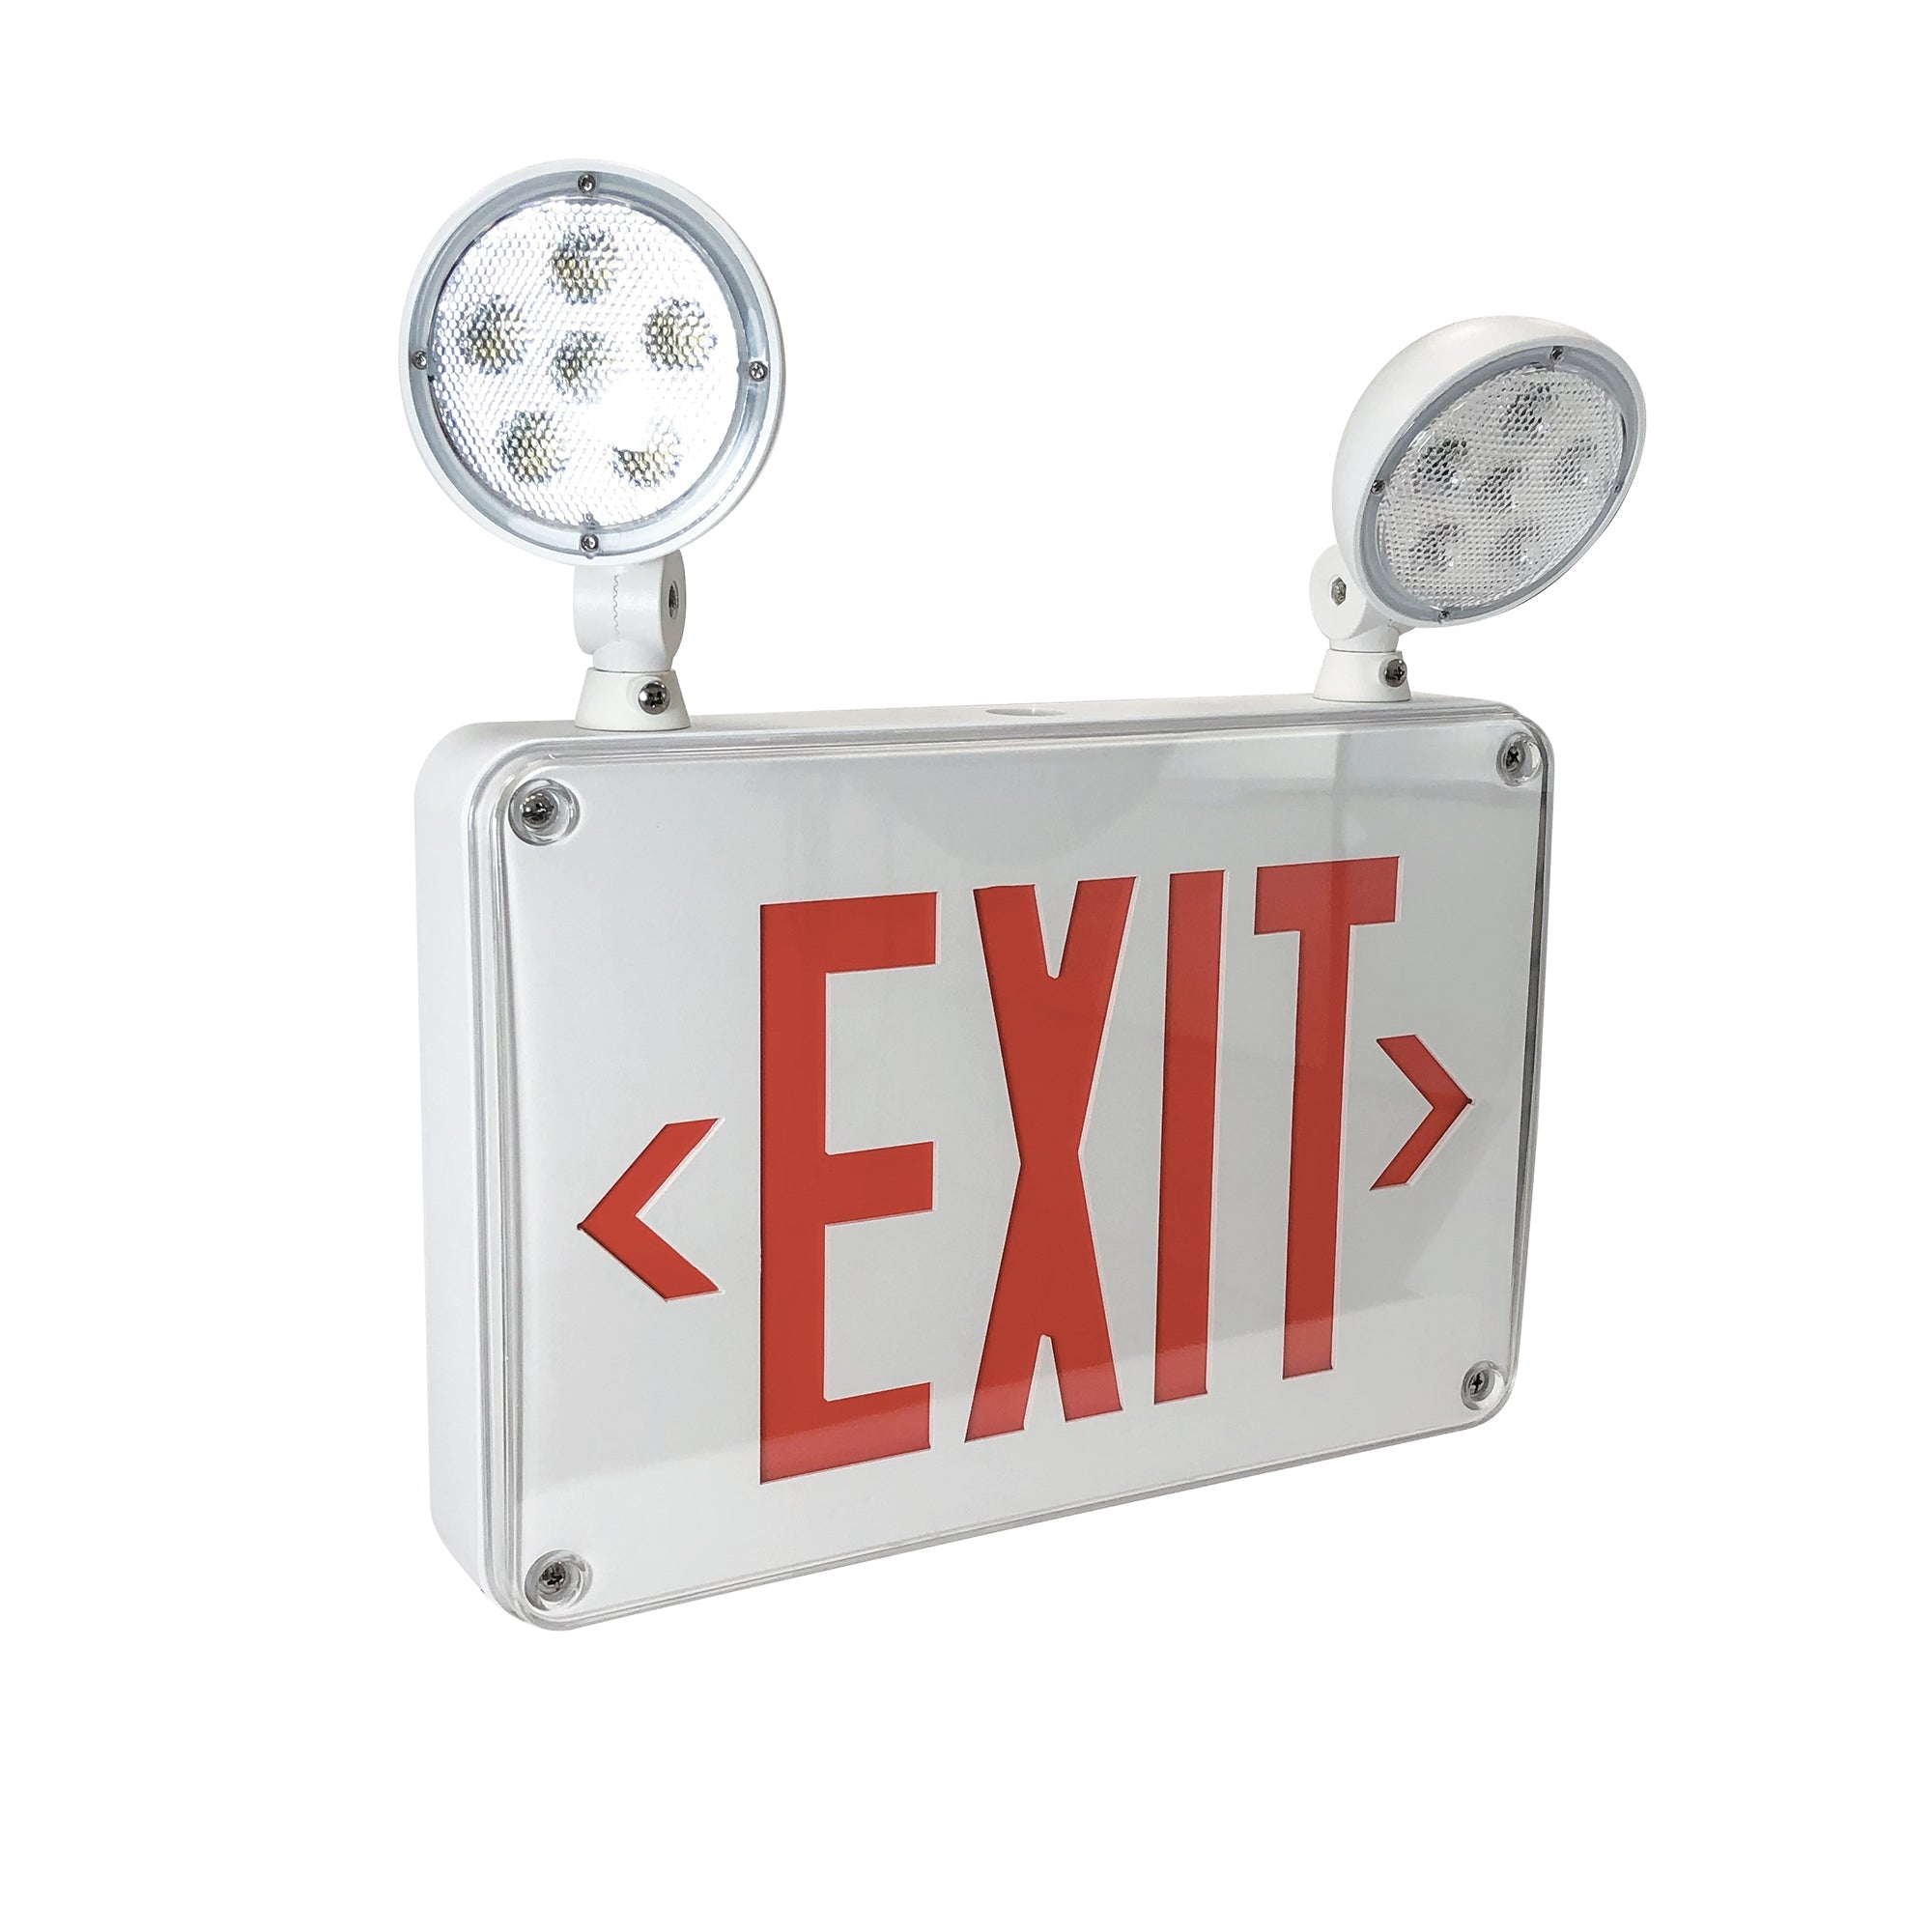 Nora Lighting NEX-720-LED/R - Exit / Emergency - LED Self-Diagnostic Wet Location Exit & Emergency Sign w/ Battery Backup & Remote Capability, White Housing w/ Red Letters